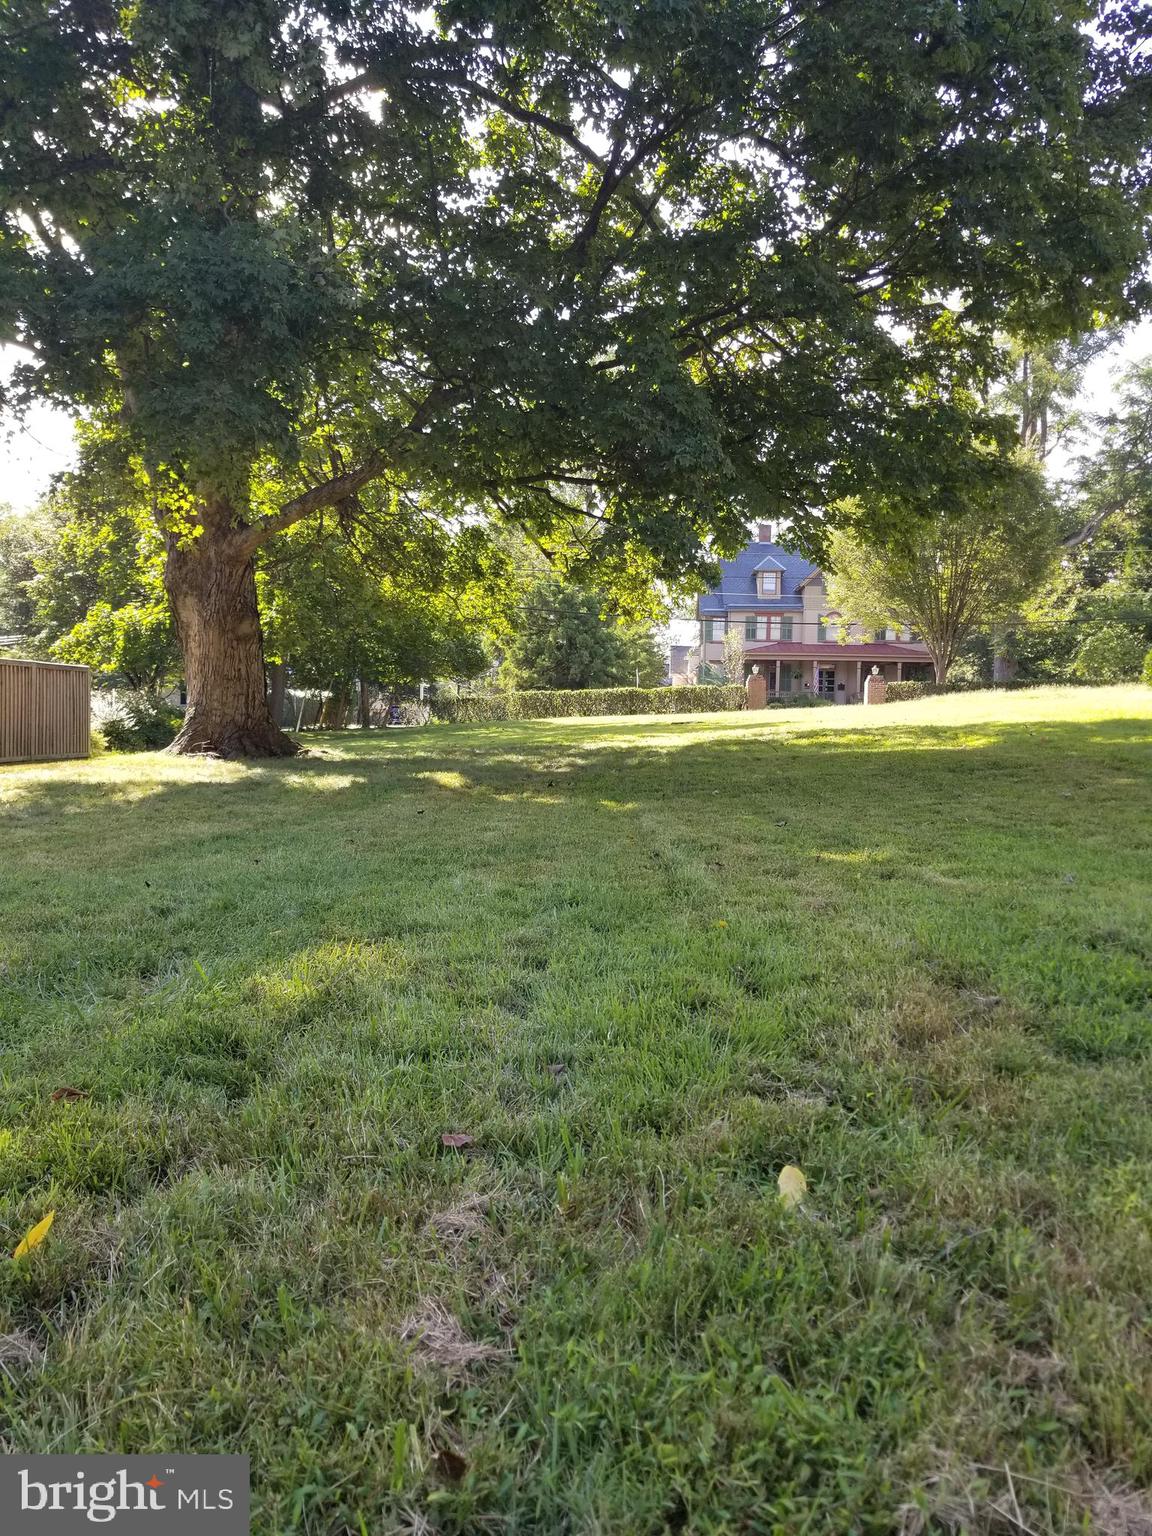 a view of a trees with a big yard